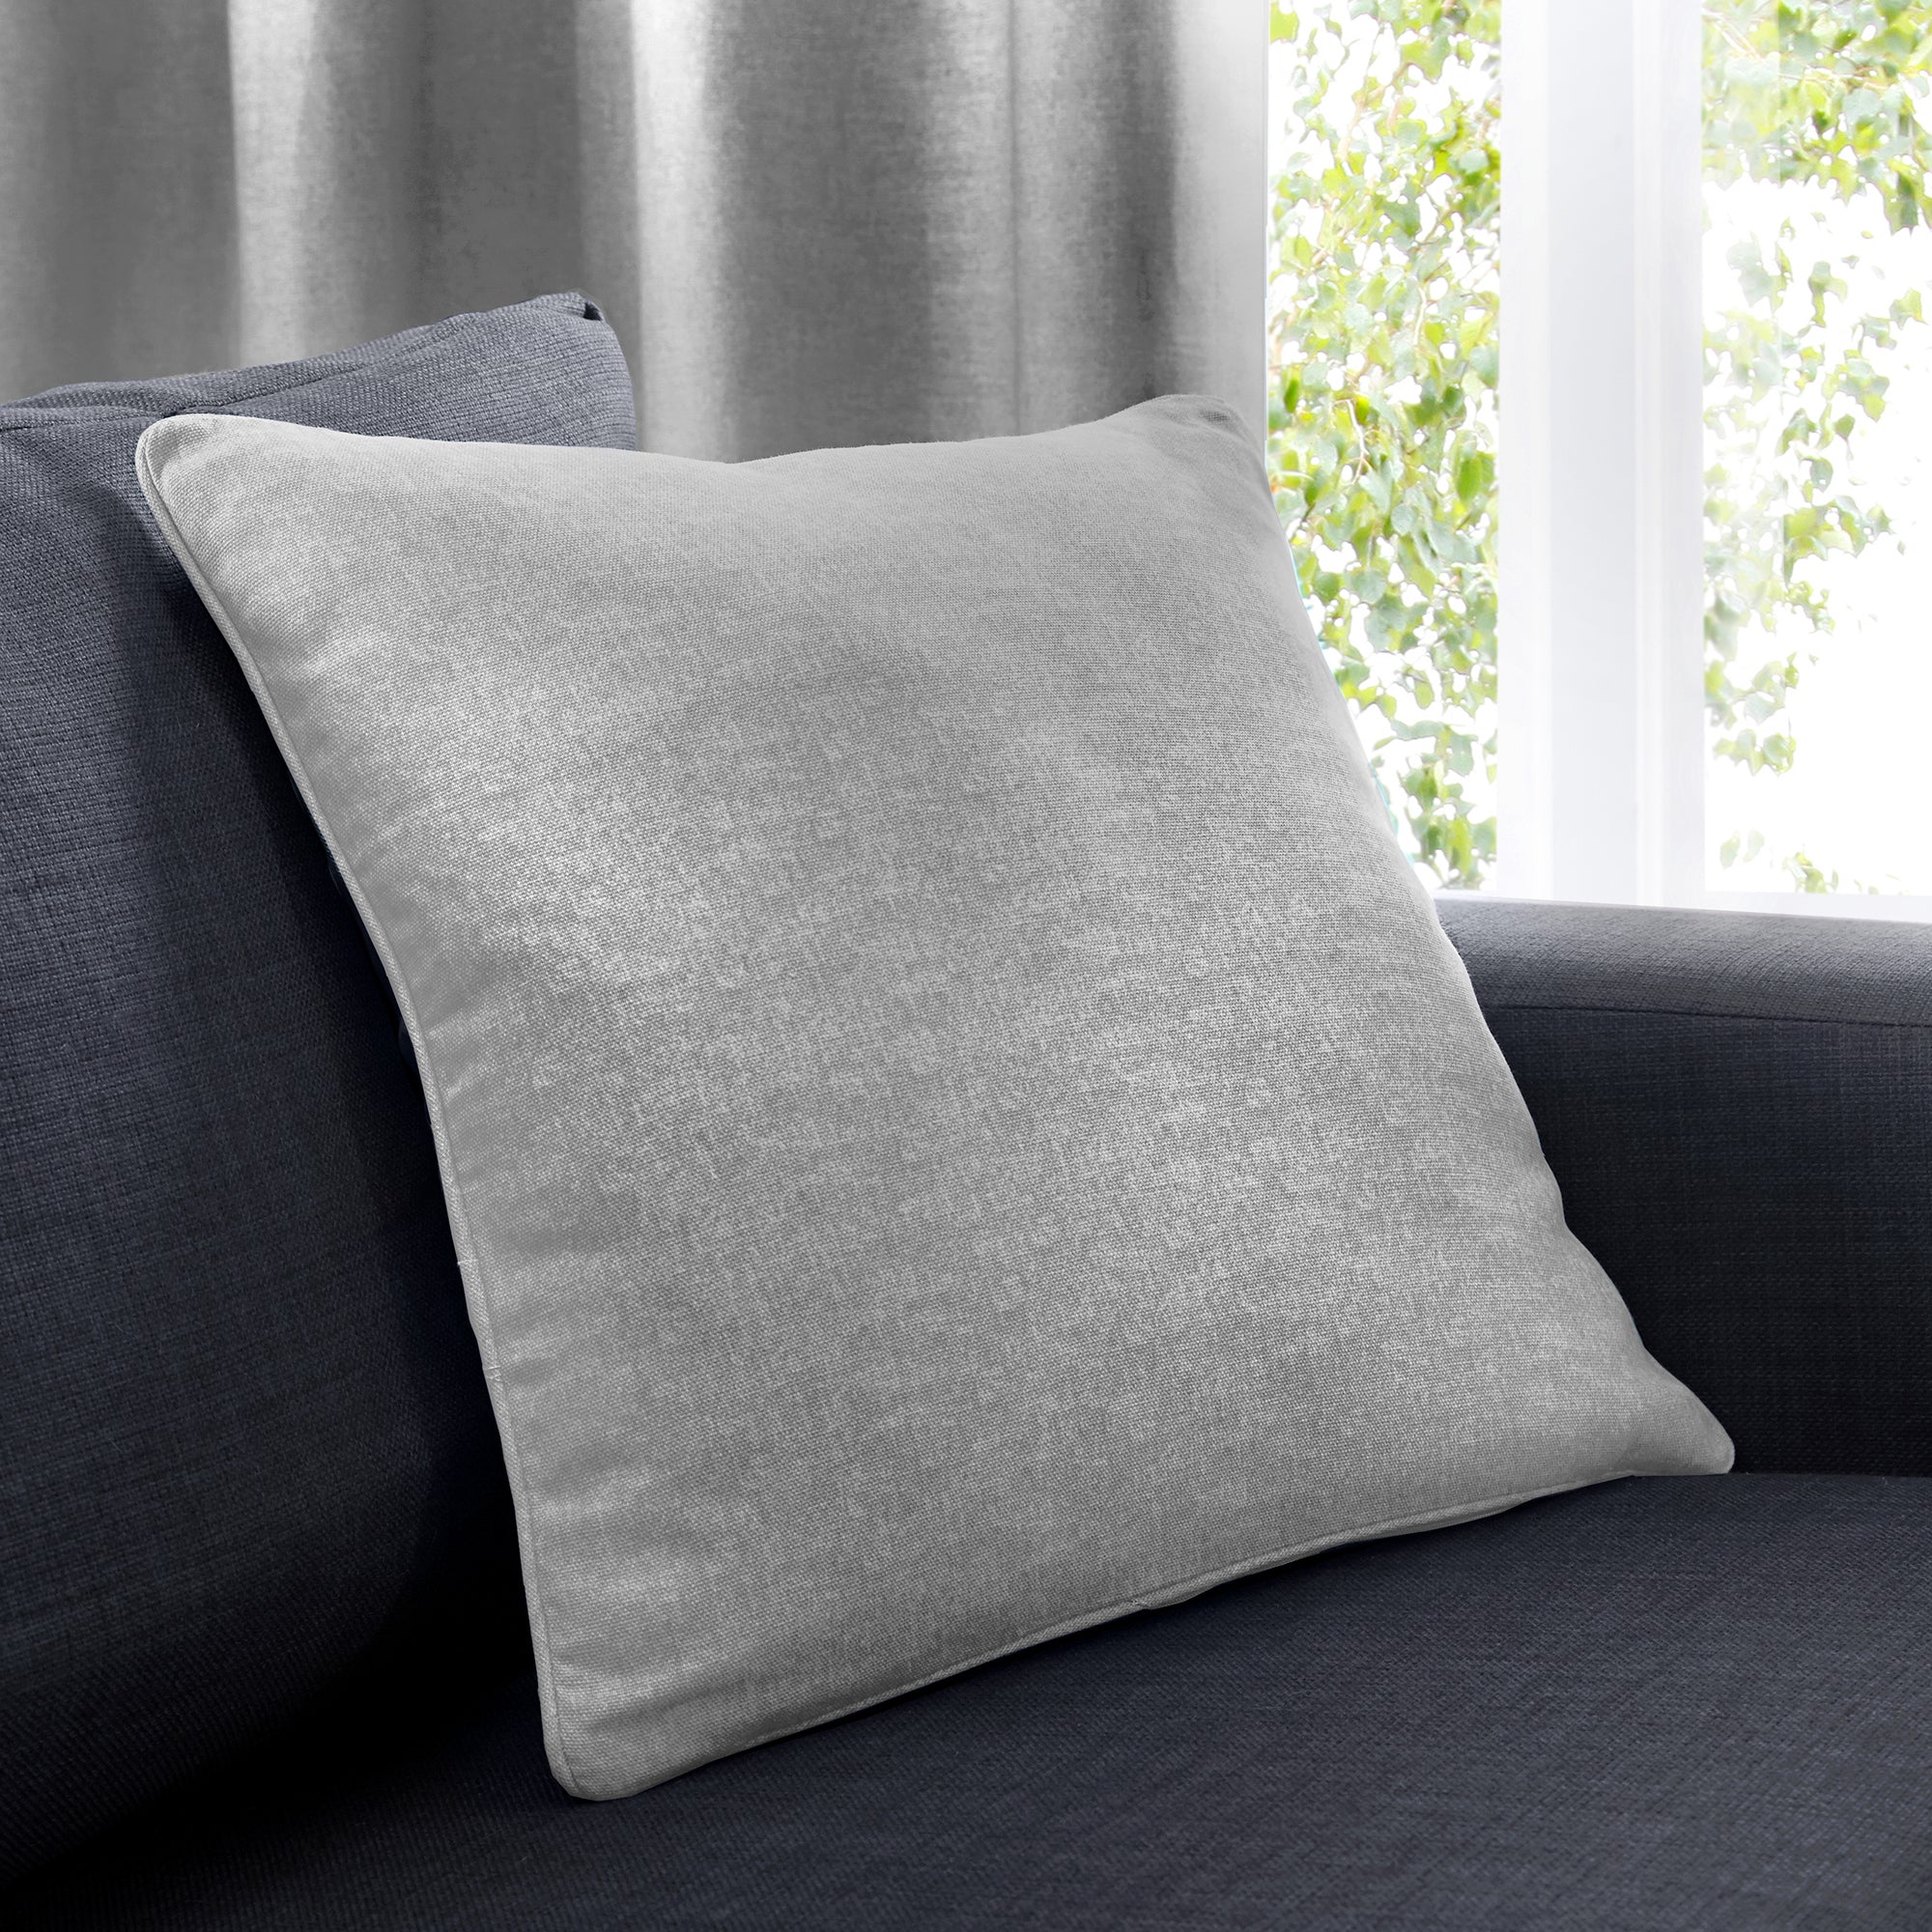 Sorbonne - 100% Cotton Filled Cushion in Silver - by Fusion